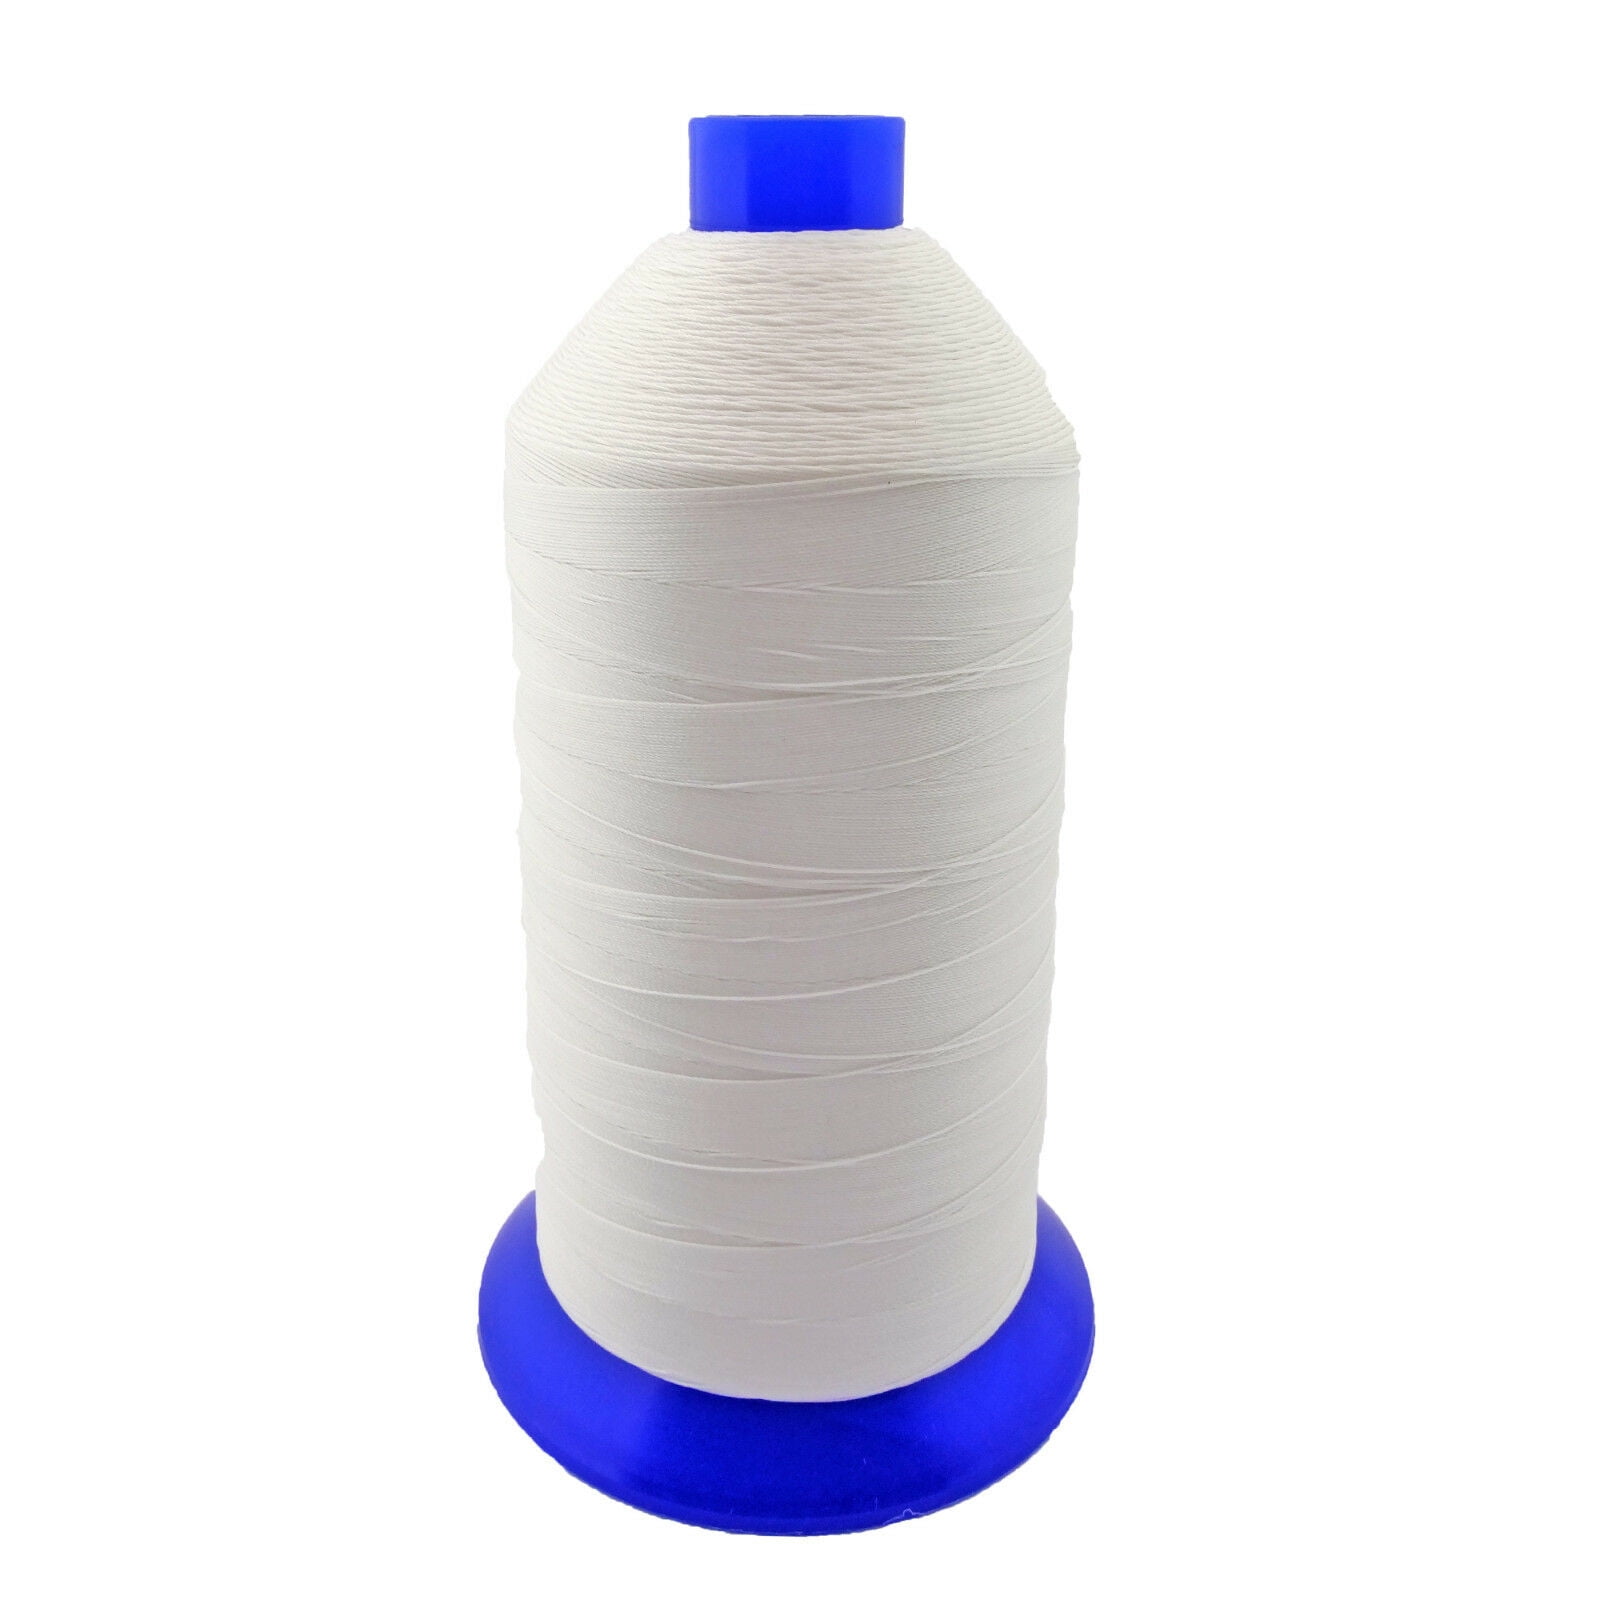 16 Cone Green Color Builder Polyester Thread Set by Threadart - 1000m Cones  - Brilliant Finish - For Machine Embroidery 